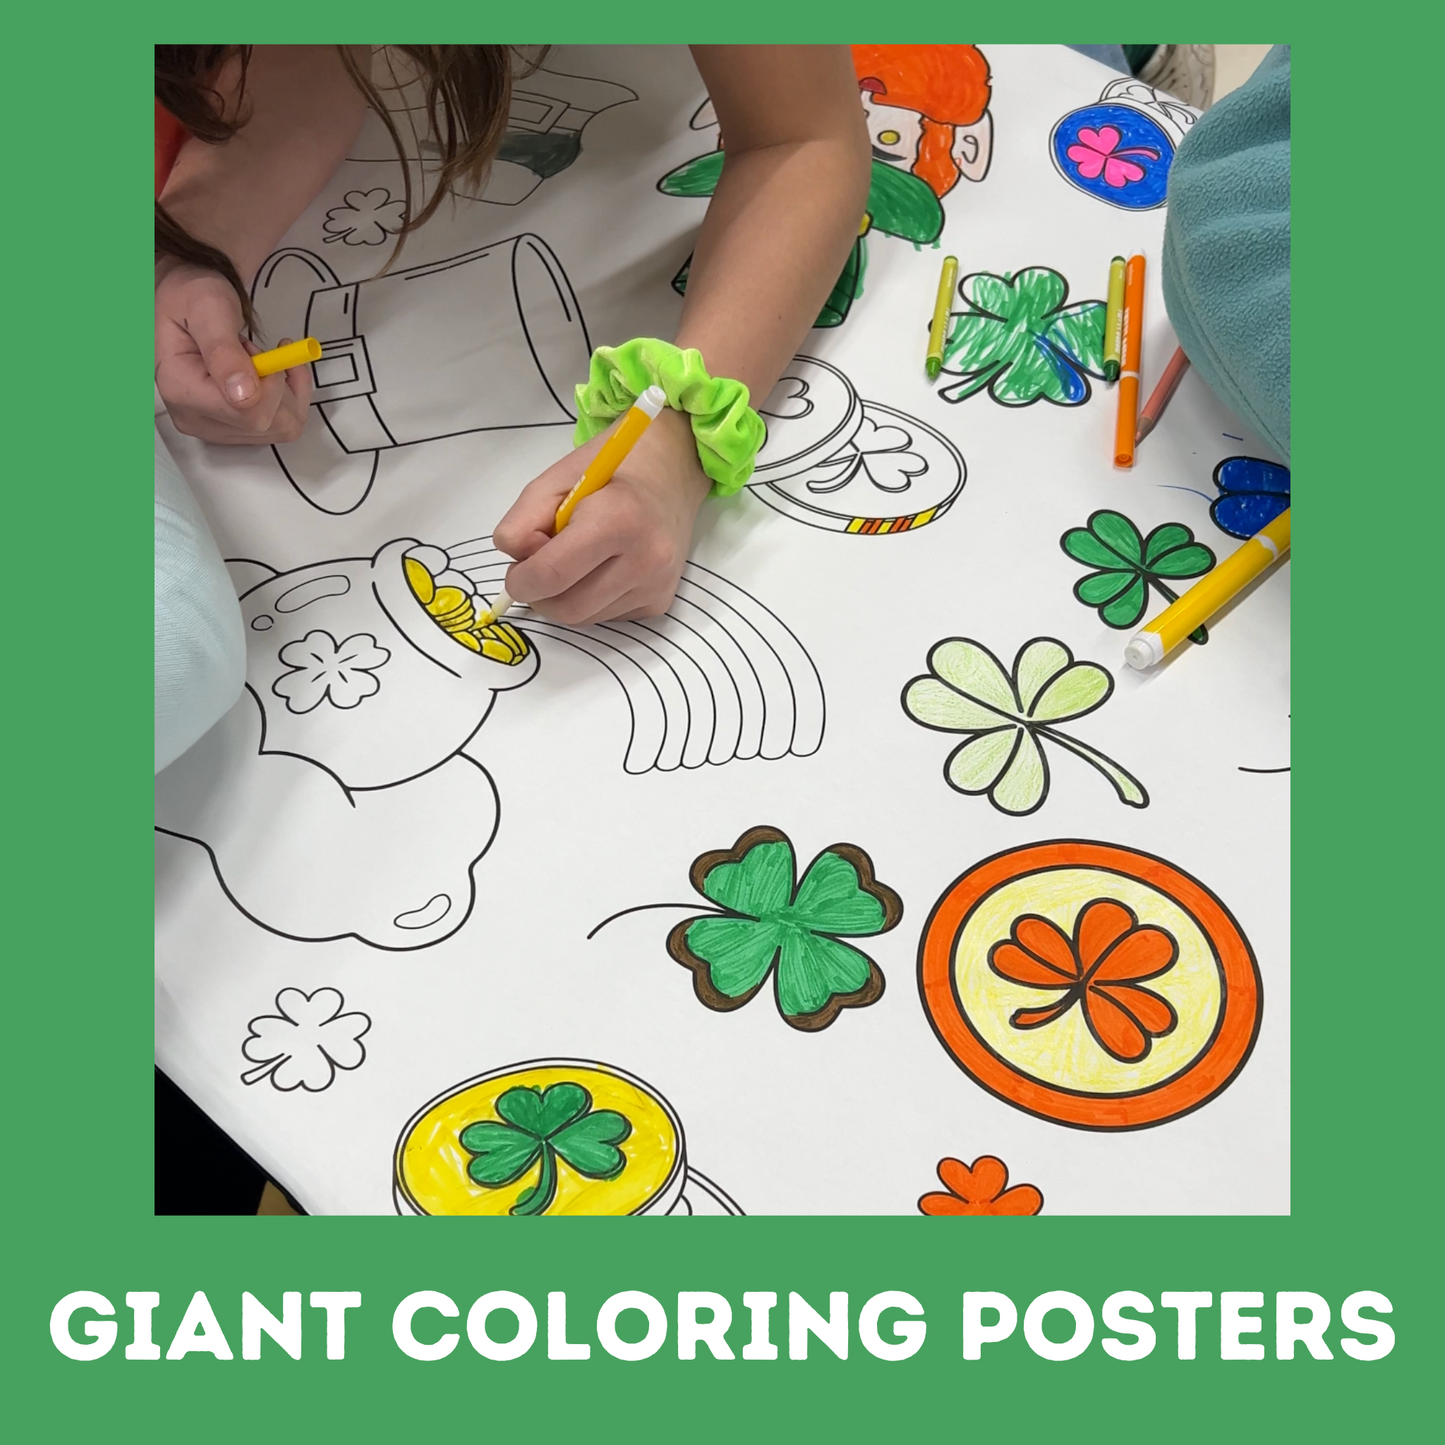 Giant Coloring Poster/ Table Cover